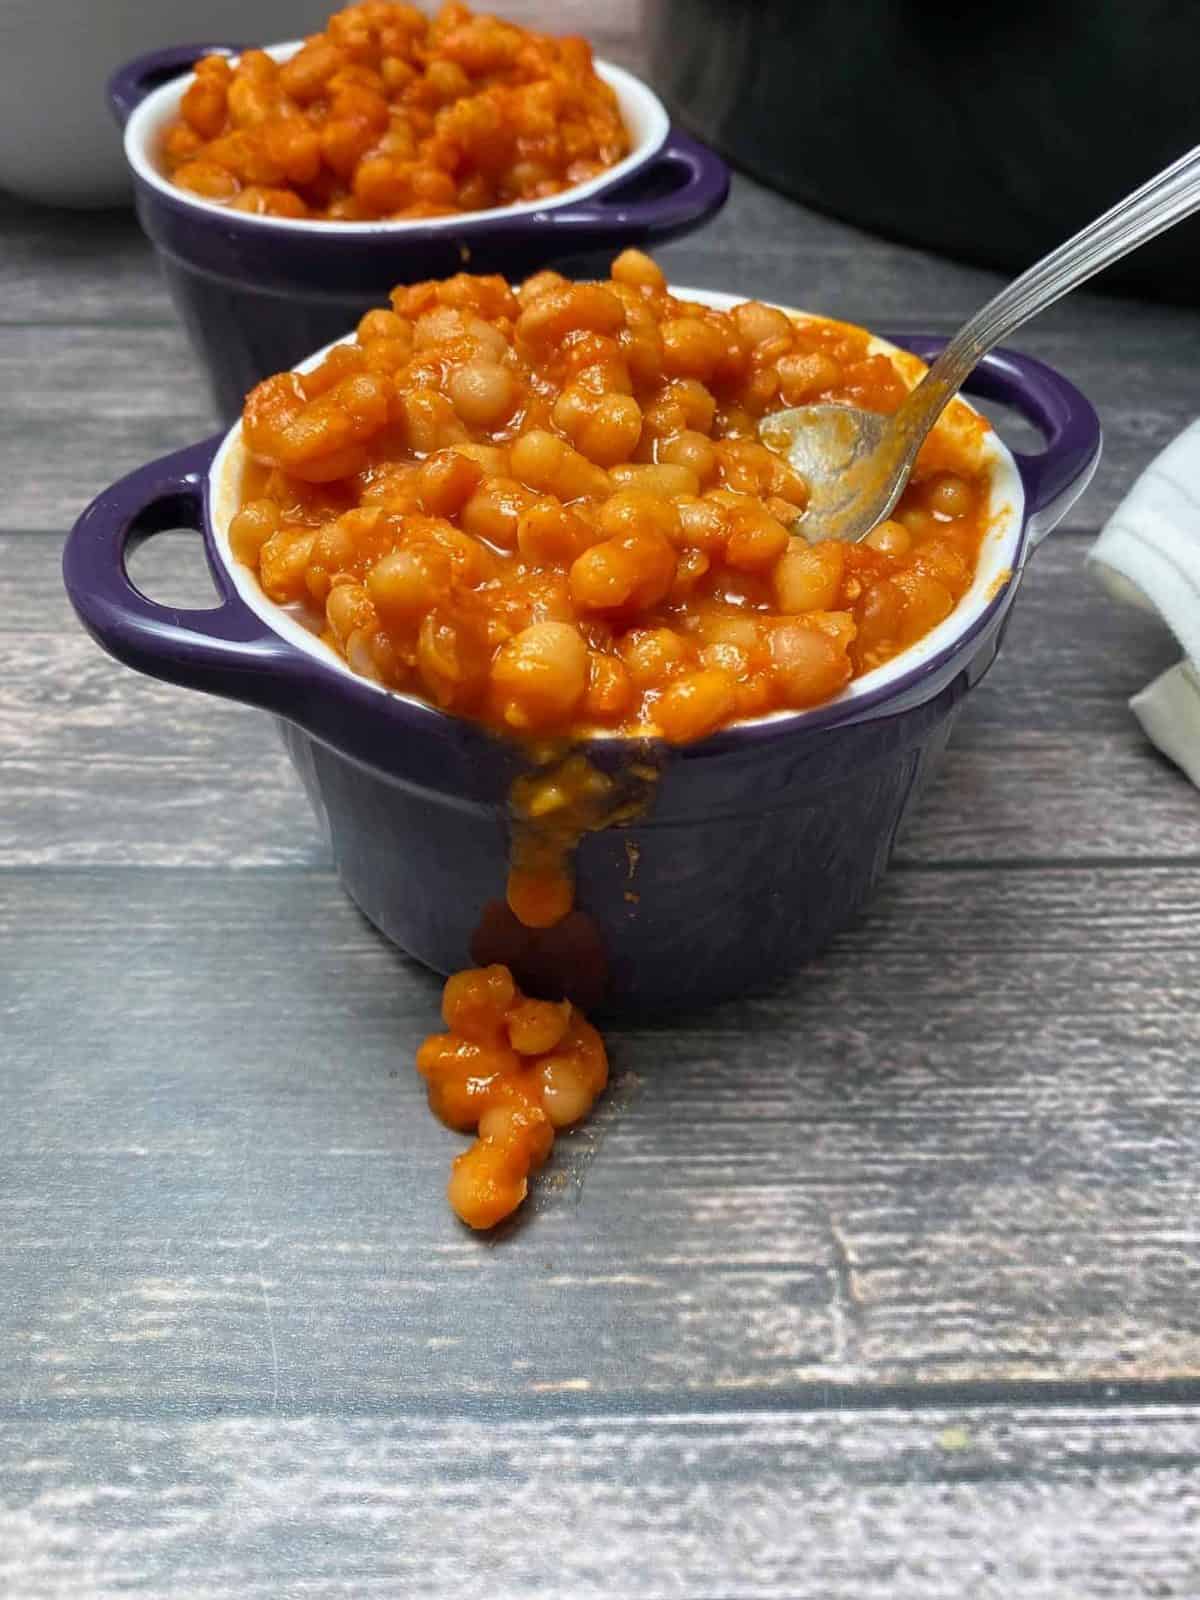 beans cooked in sauce spilling over the side of the purple bowl